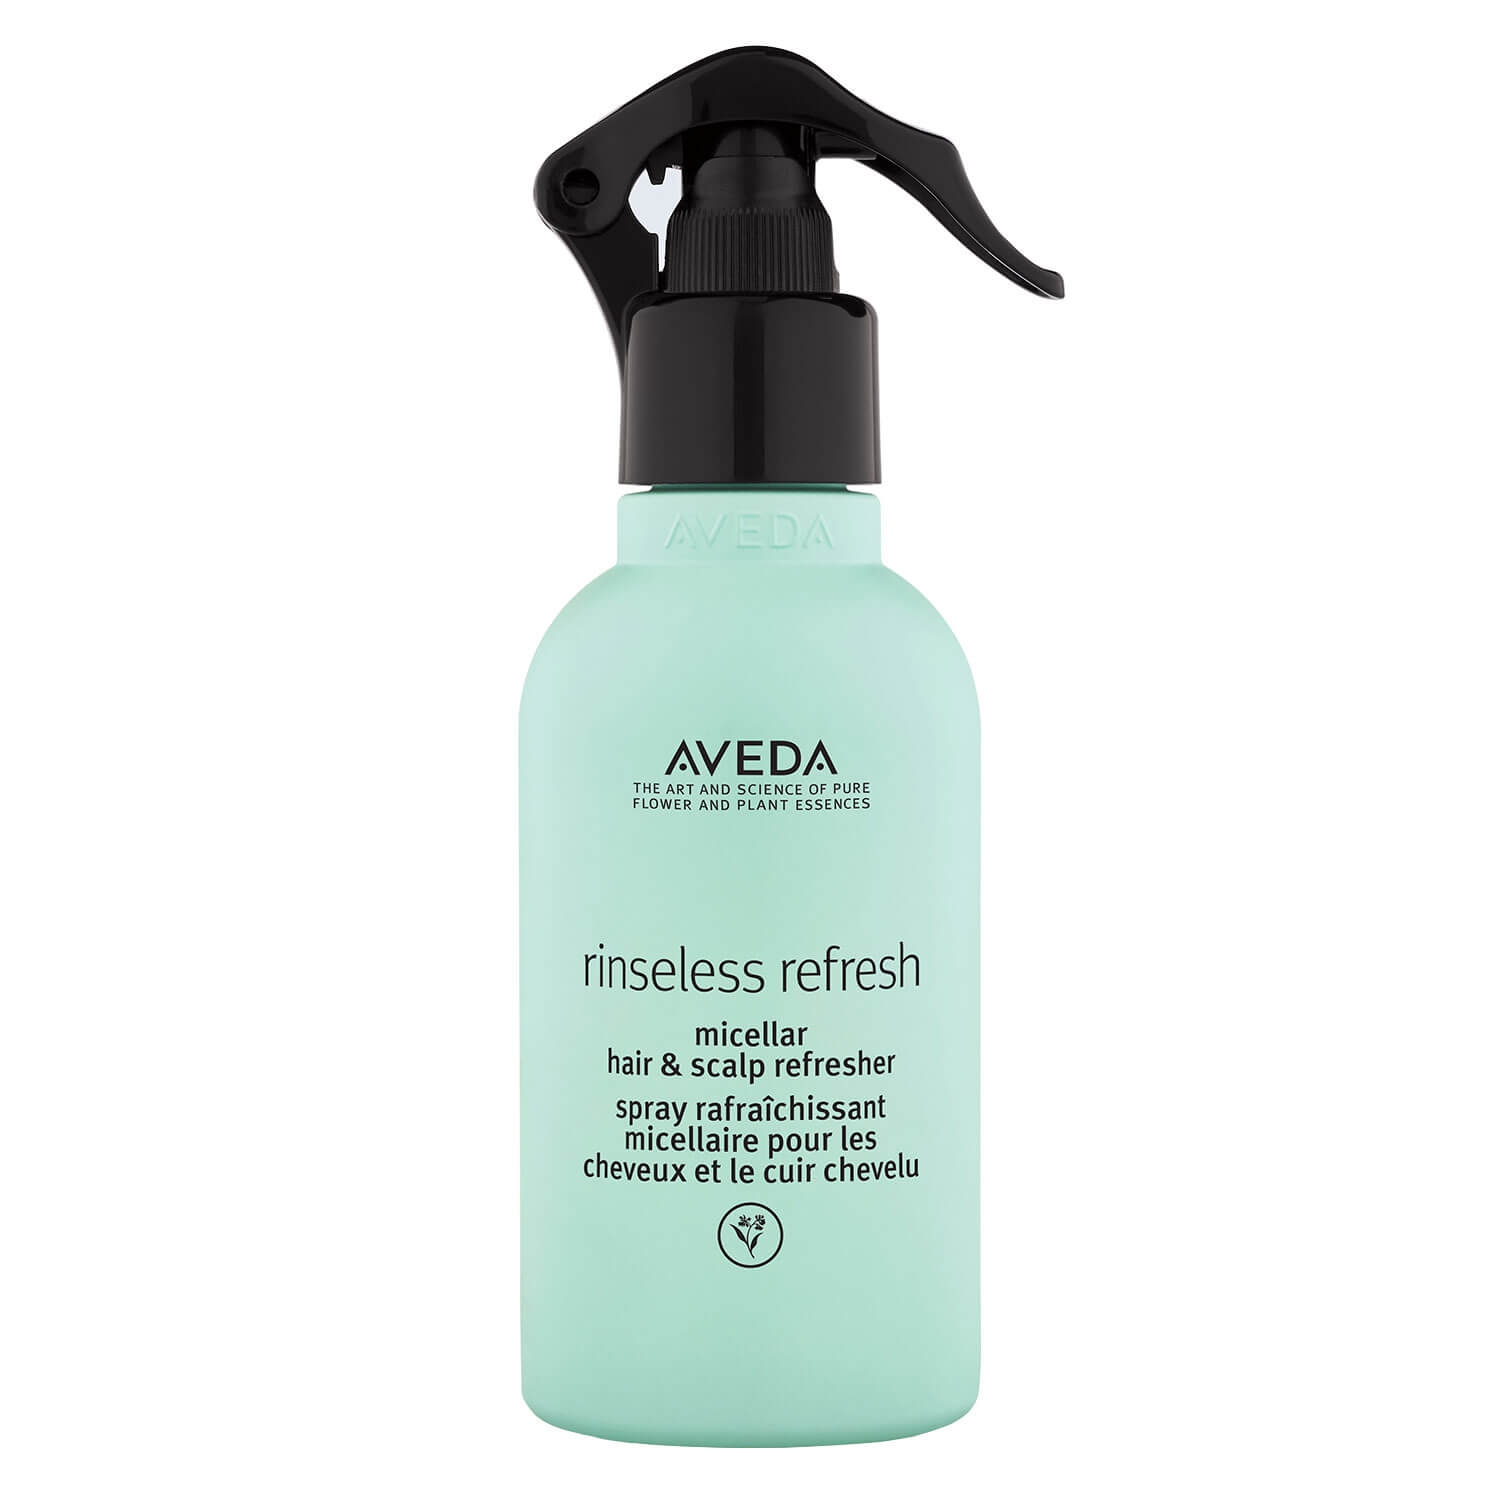 Product image from rinseless refresh - micellar hair & scalp refresher